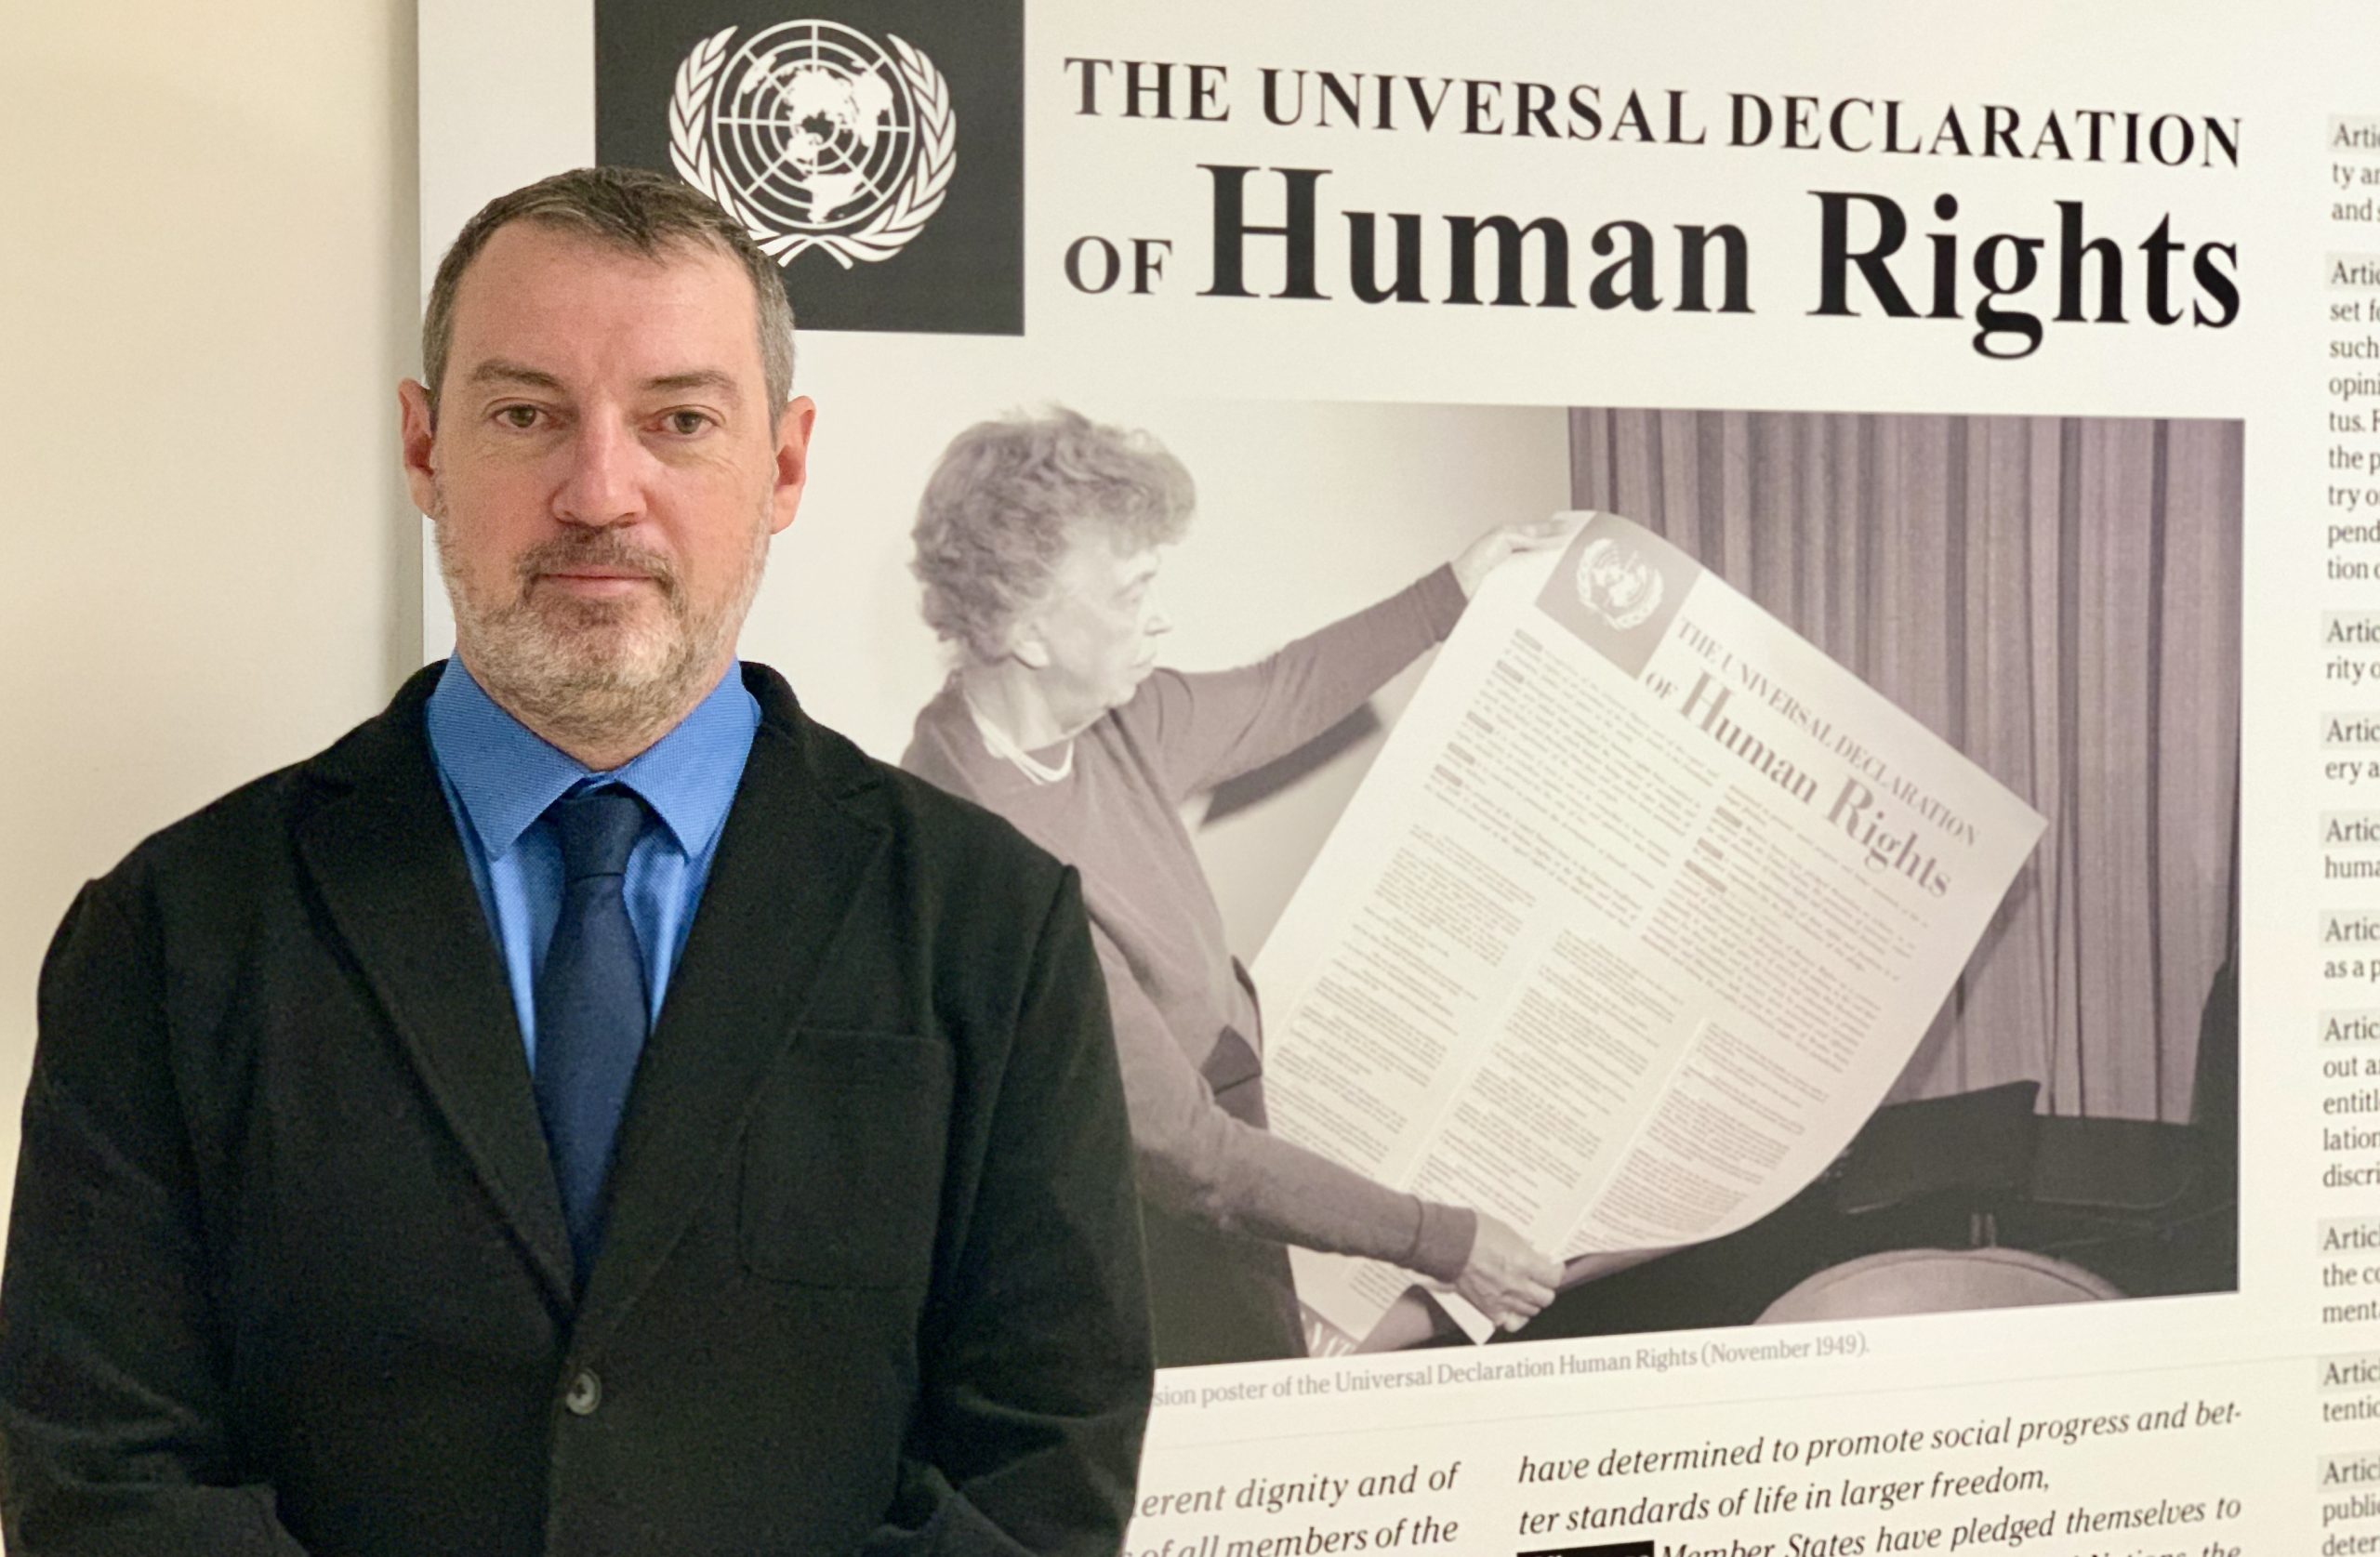 The Universal Declaration of Human Rights as an Elegant Vision of the World